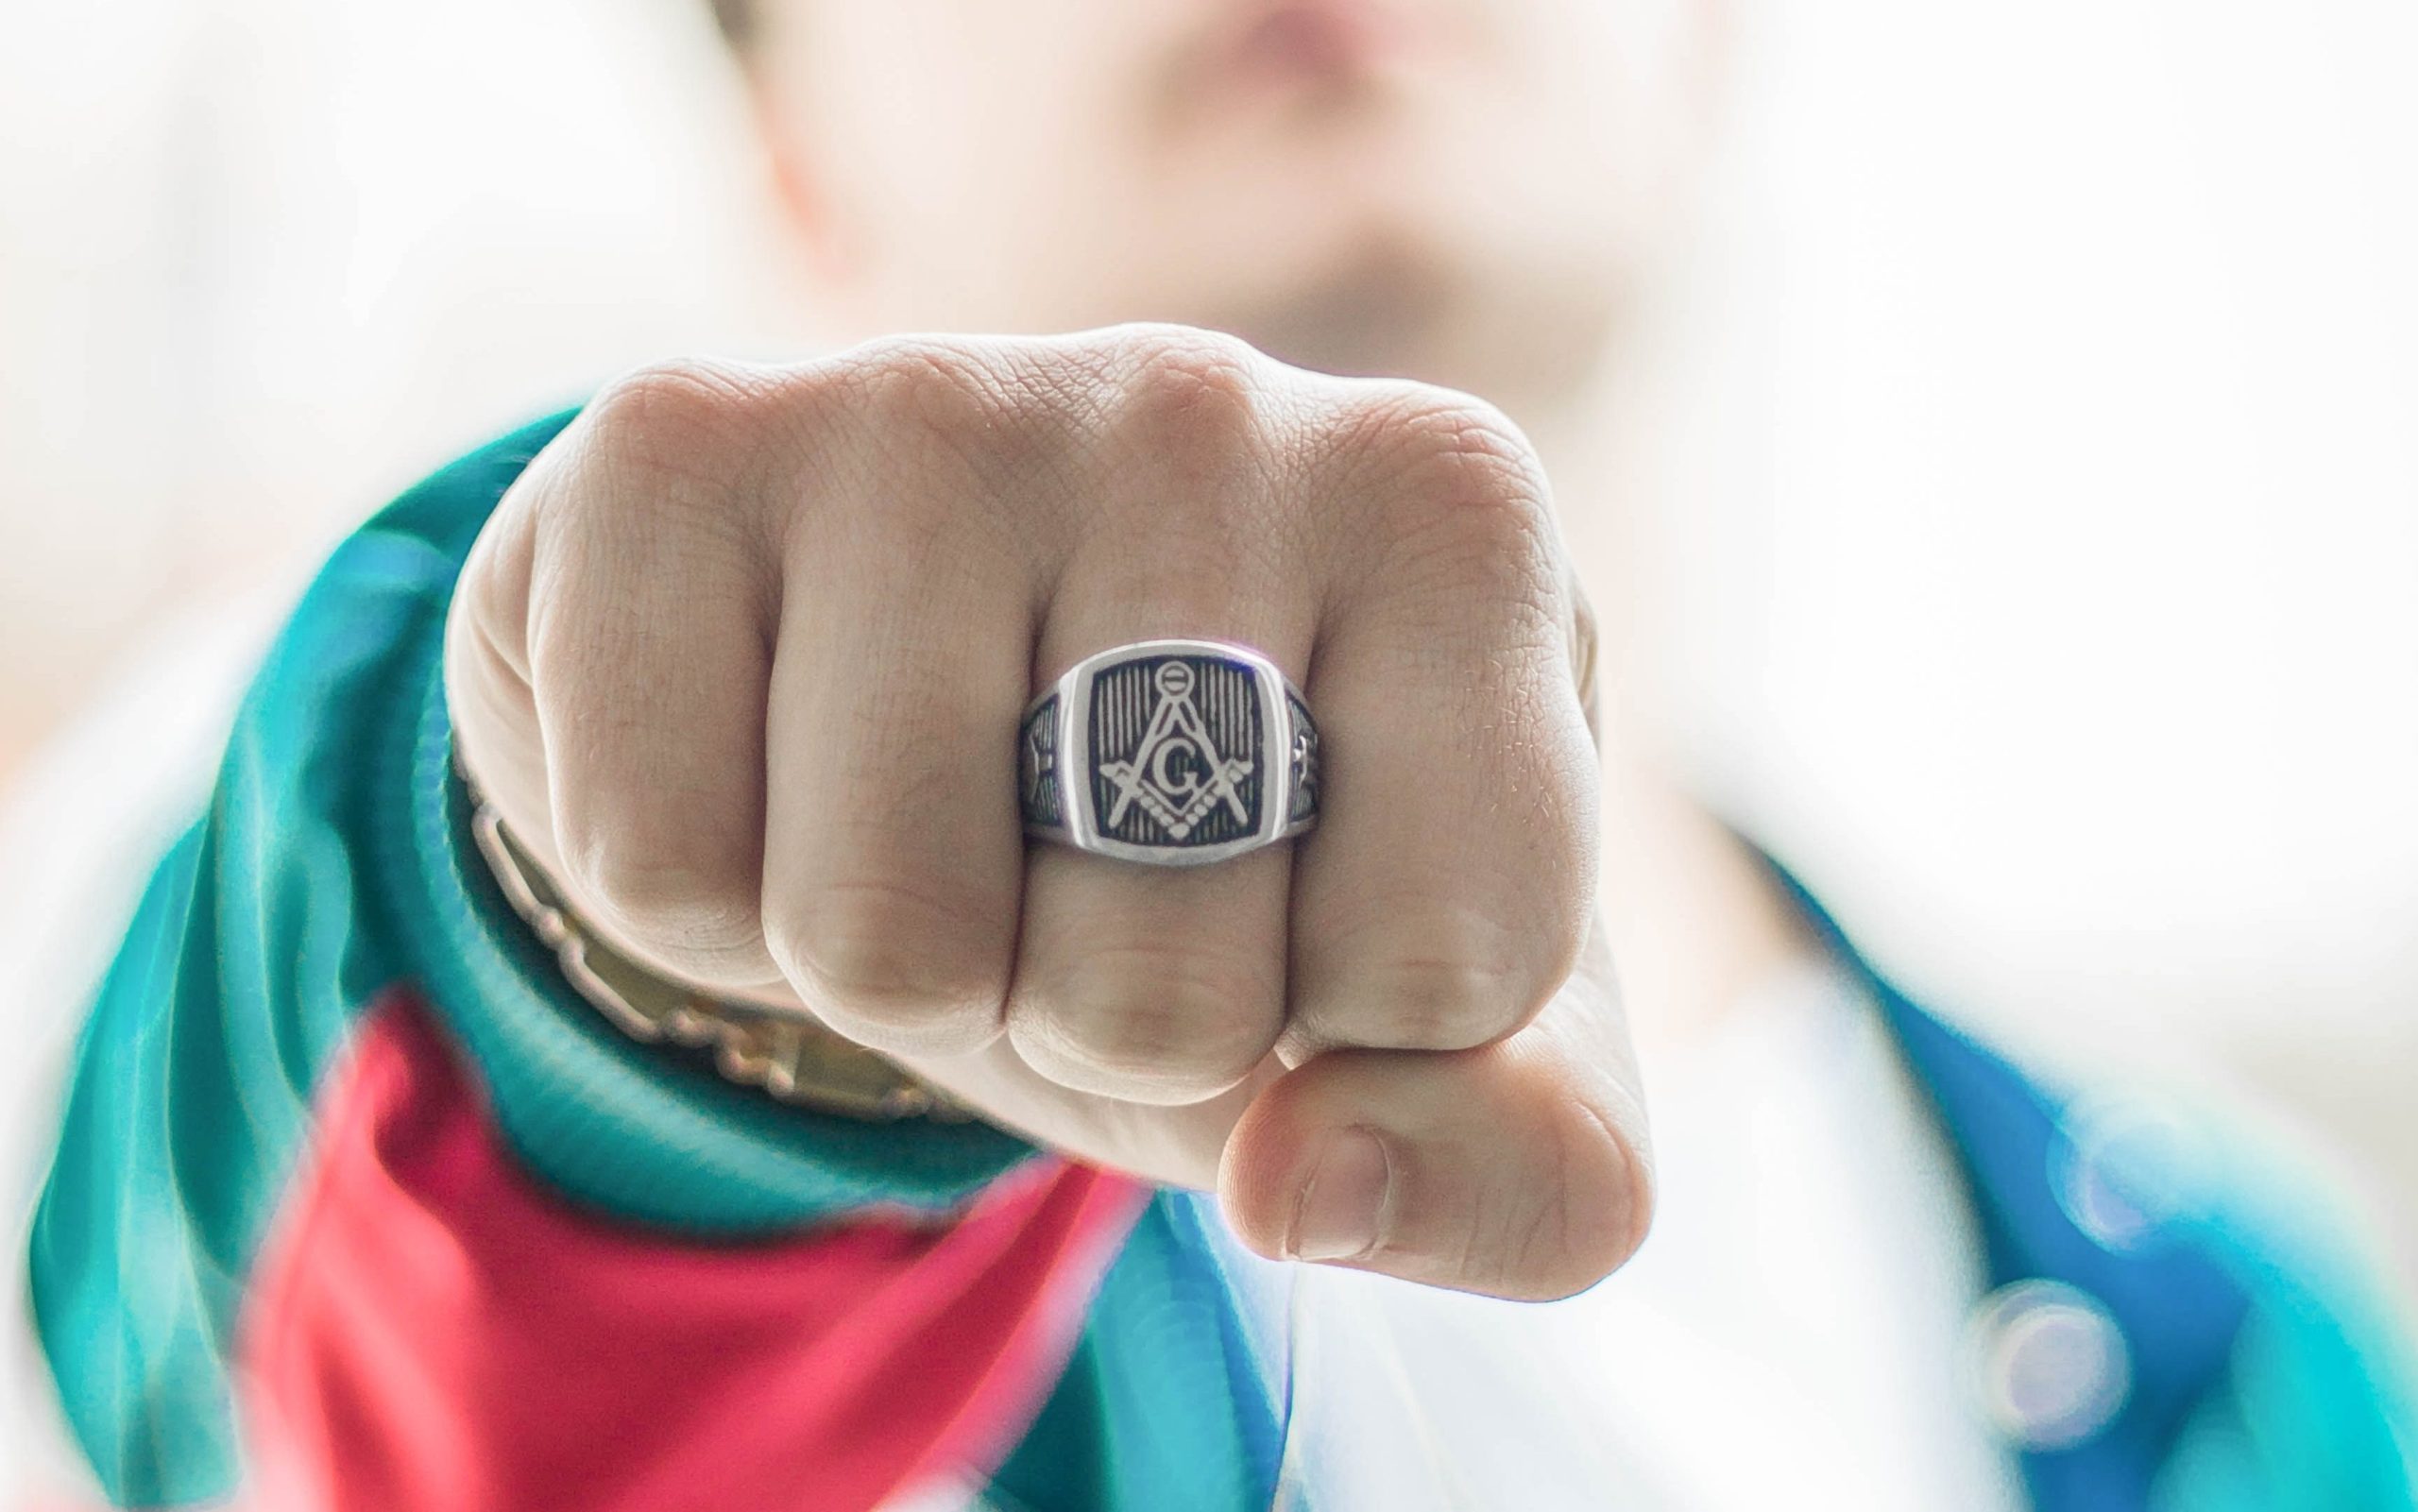 A man wear a masonic ring on his middle finger